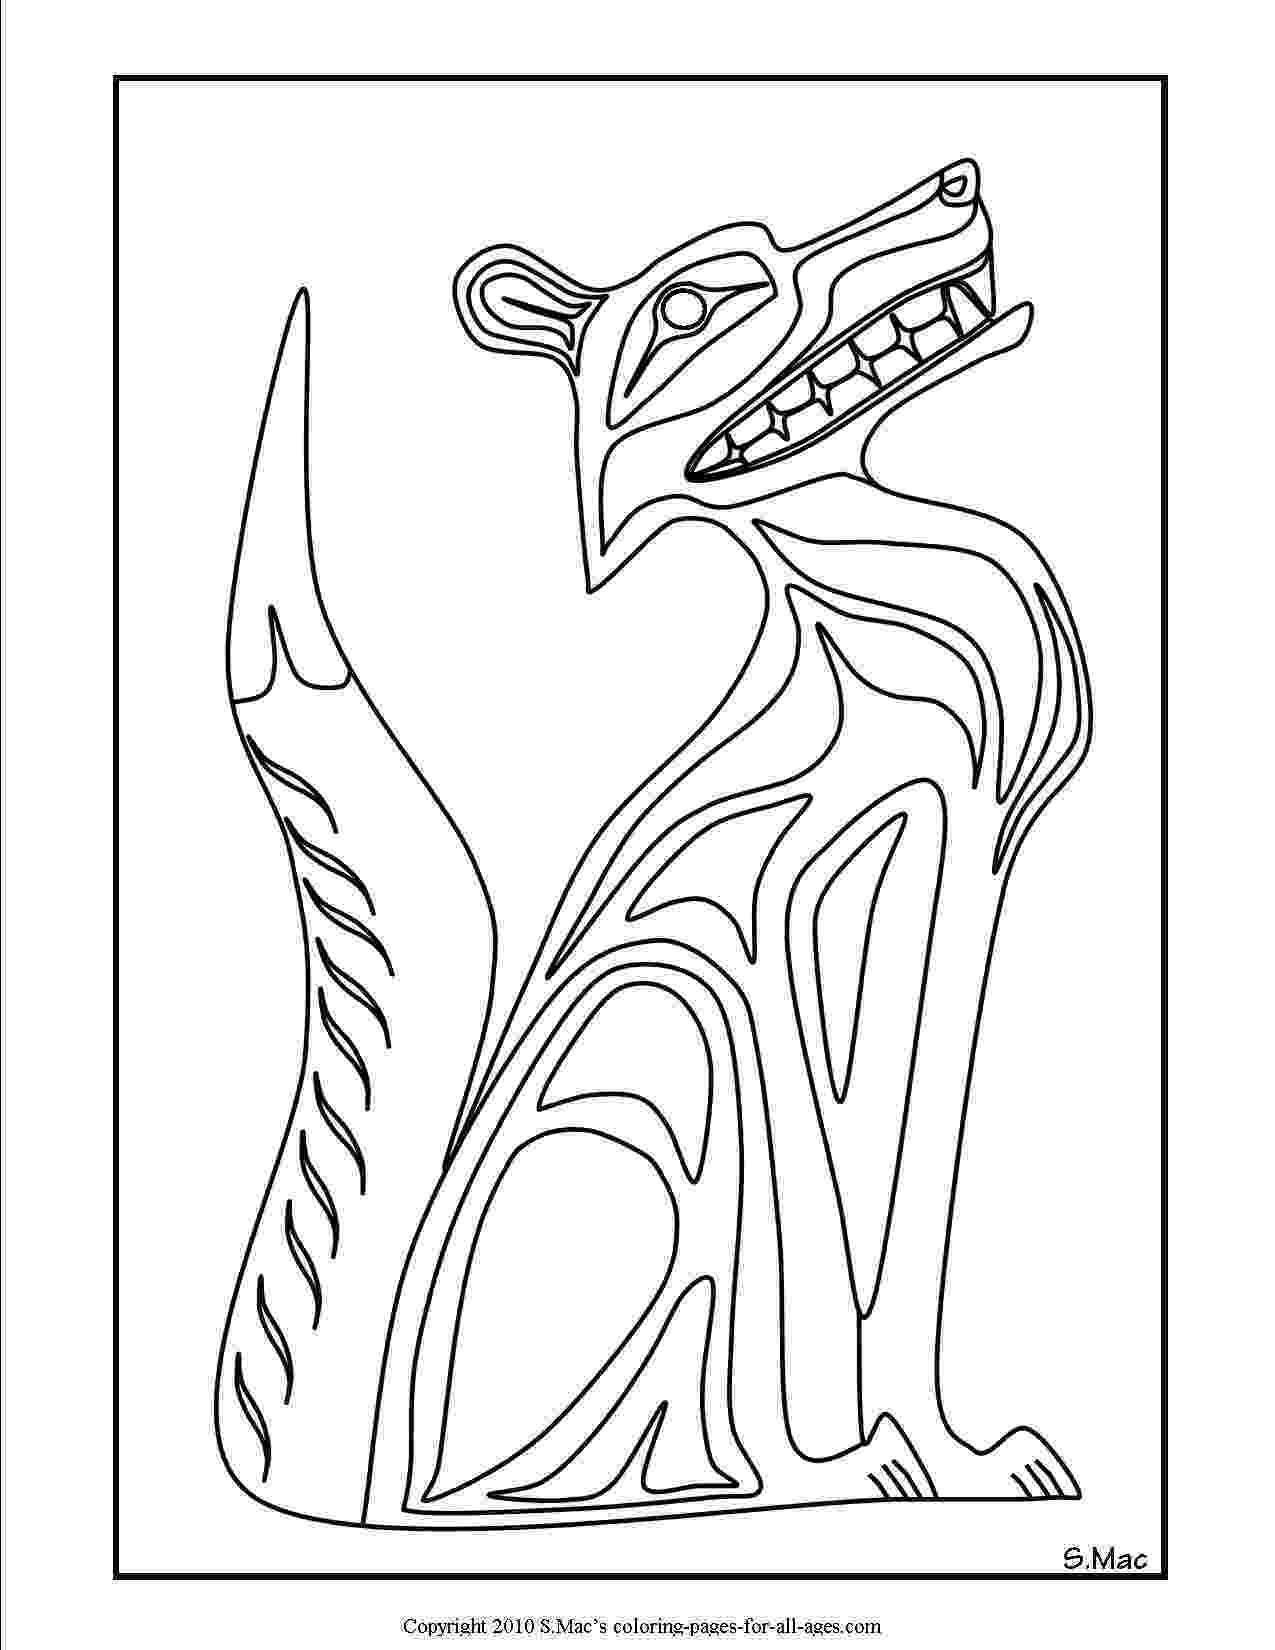 free native american coloring pages native american coloring pages to download and print for free coloring pages american free native 